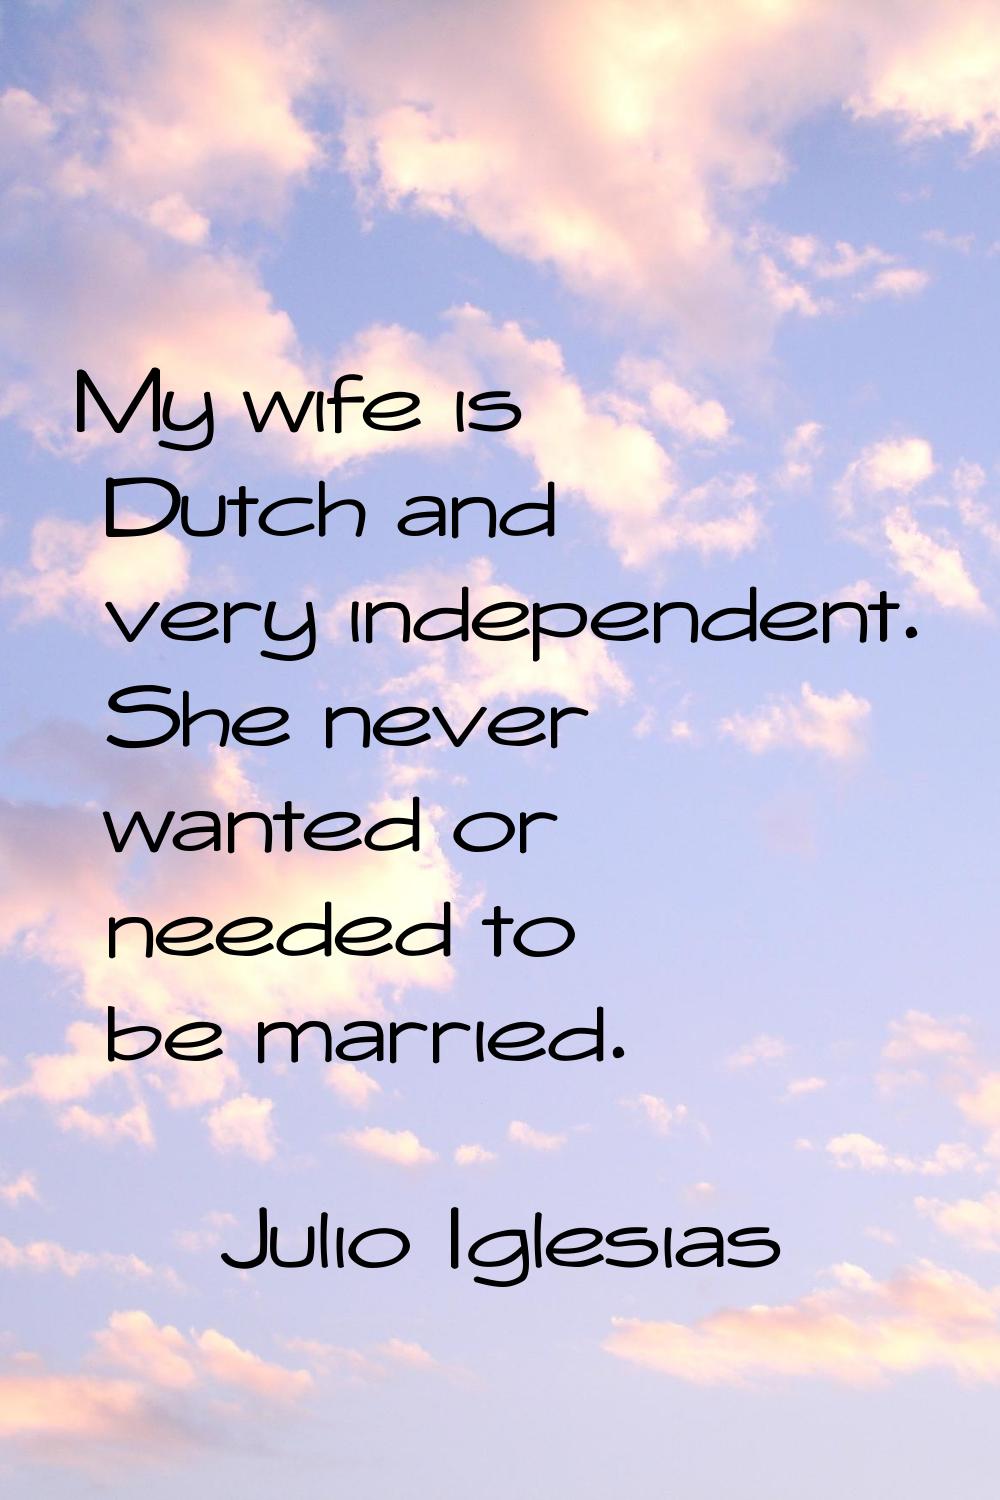 My wife is Dutch and very independent. She never wanted or needed to be married.